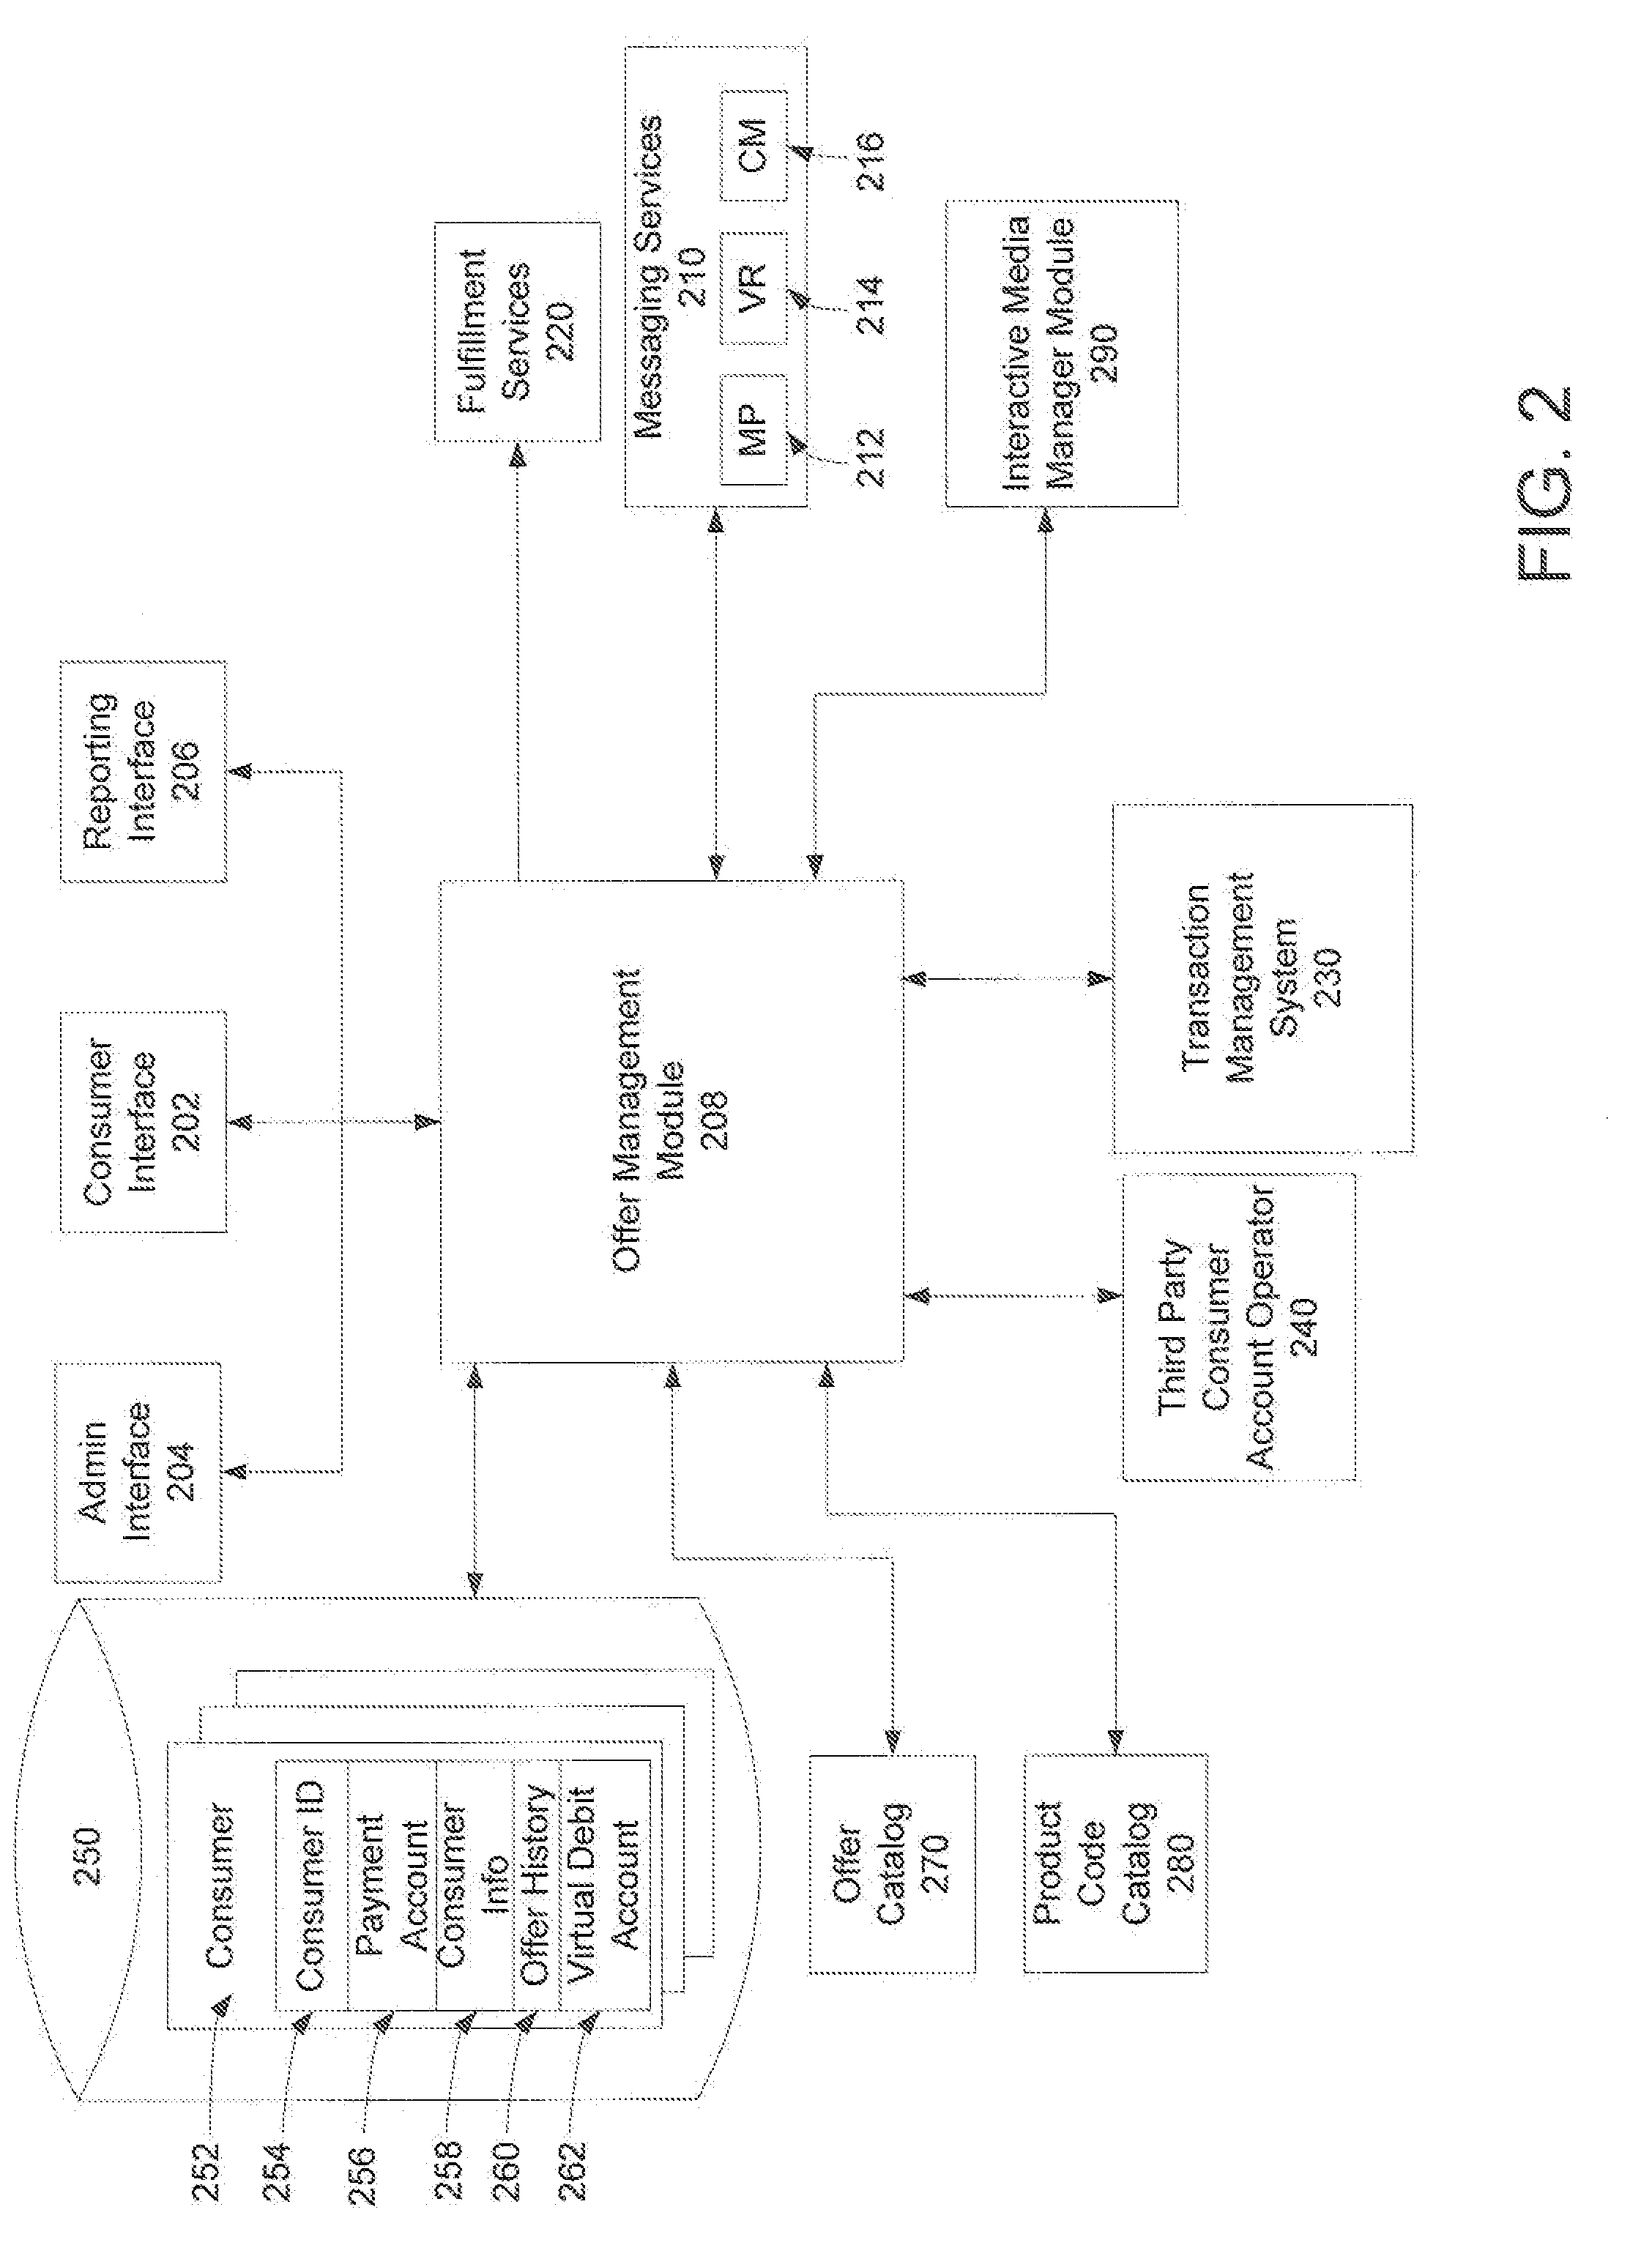 System and Method for Managing Promotional Offers Using a Communications Platform